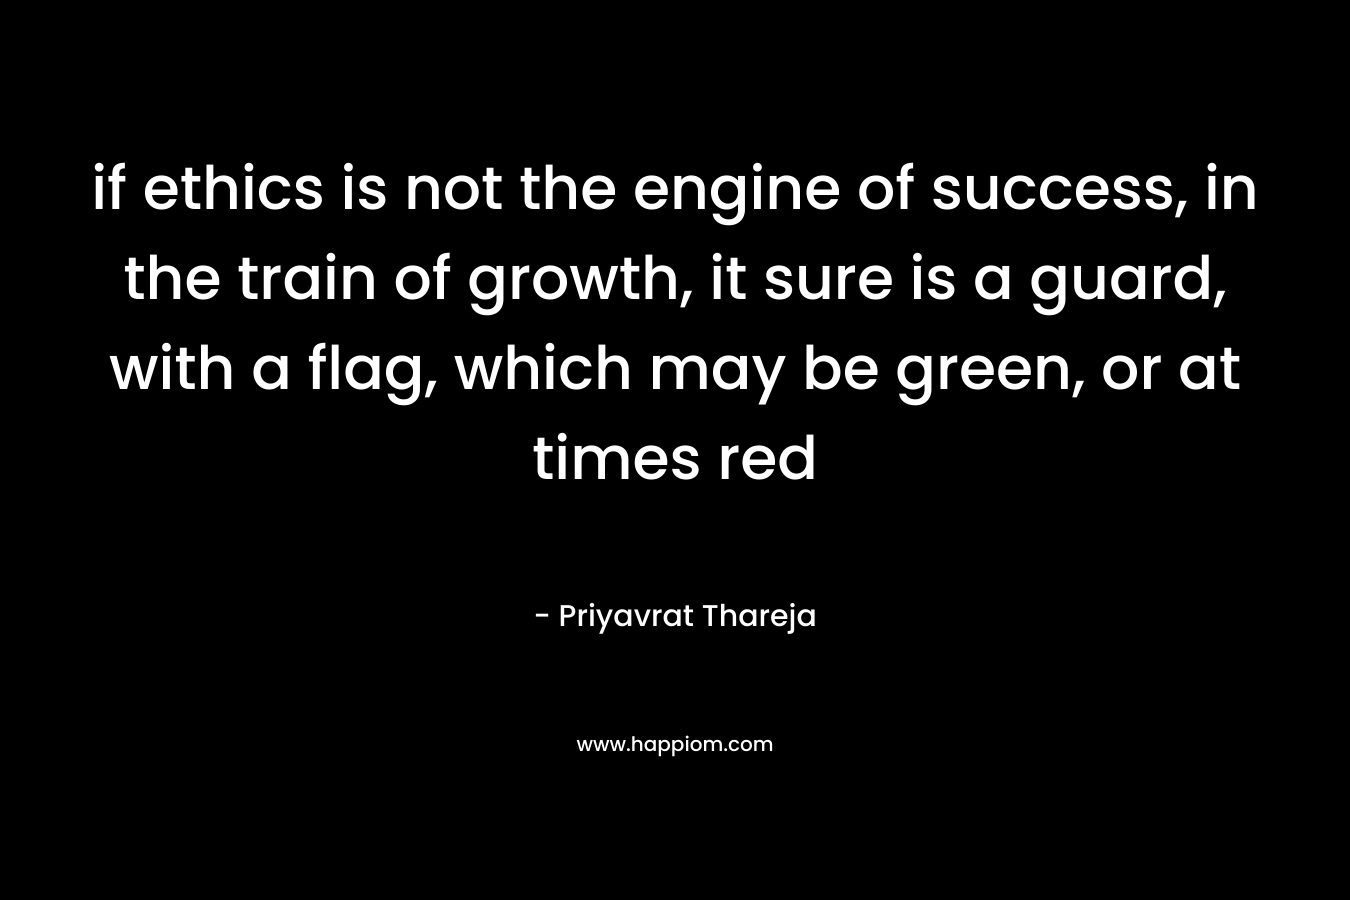 if ethics is not the engine of success, in the train of growth, it sure is a guard, with a flag, which may be green, or at times red – Priyavrat Thareja